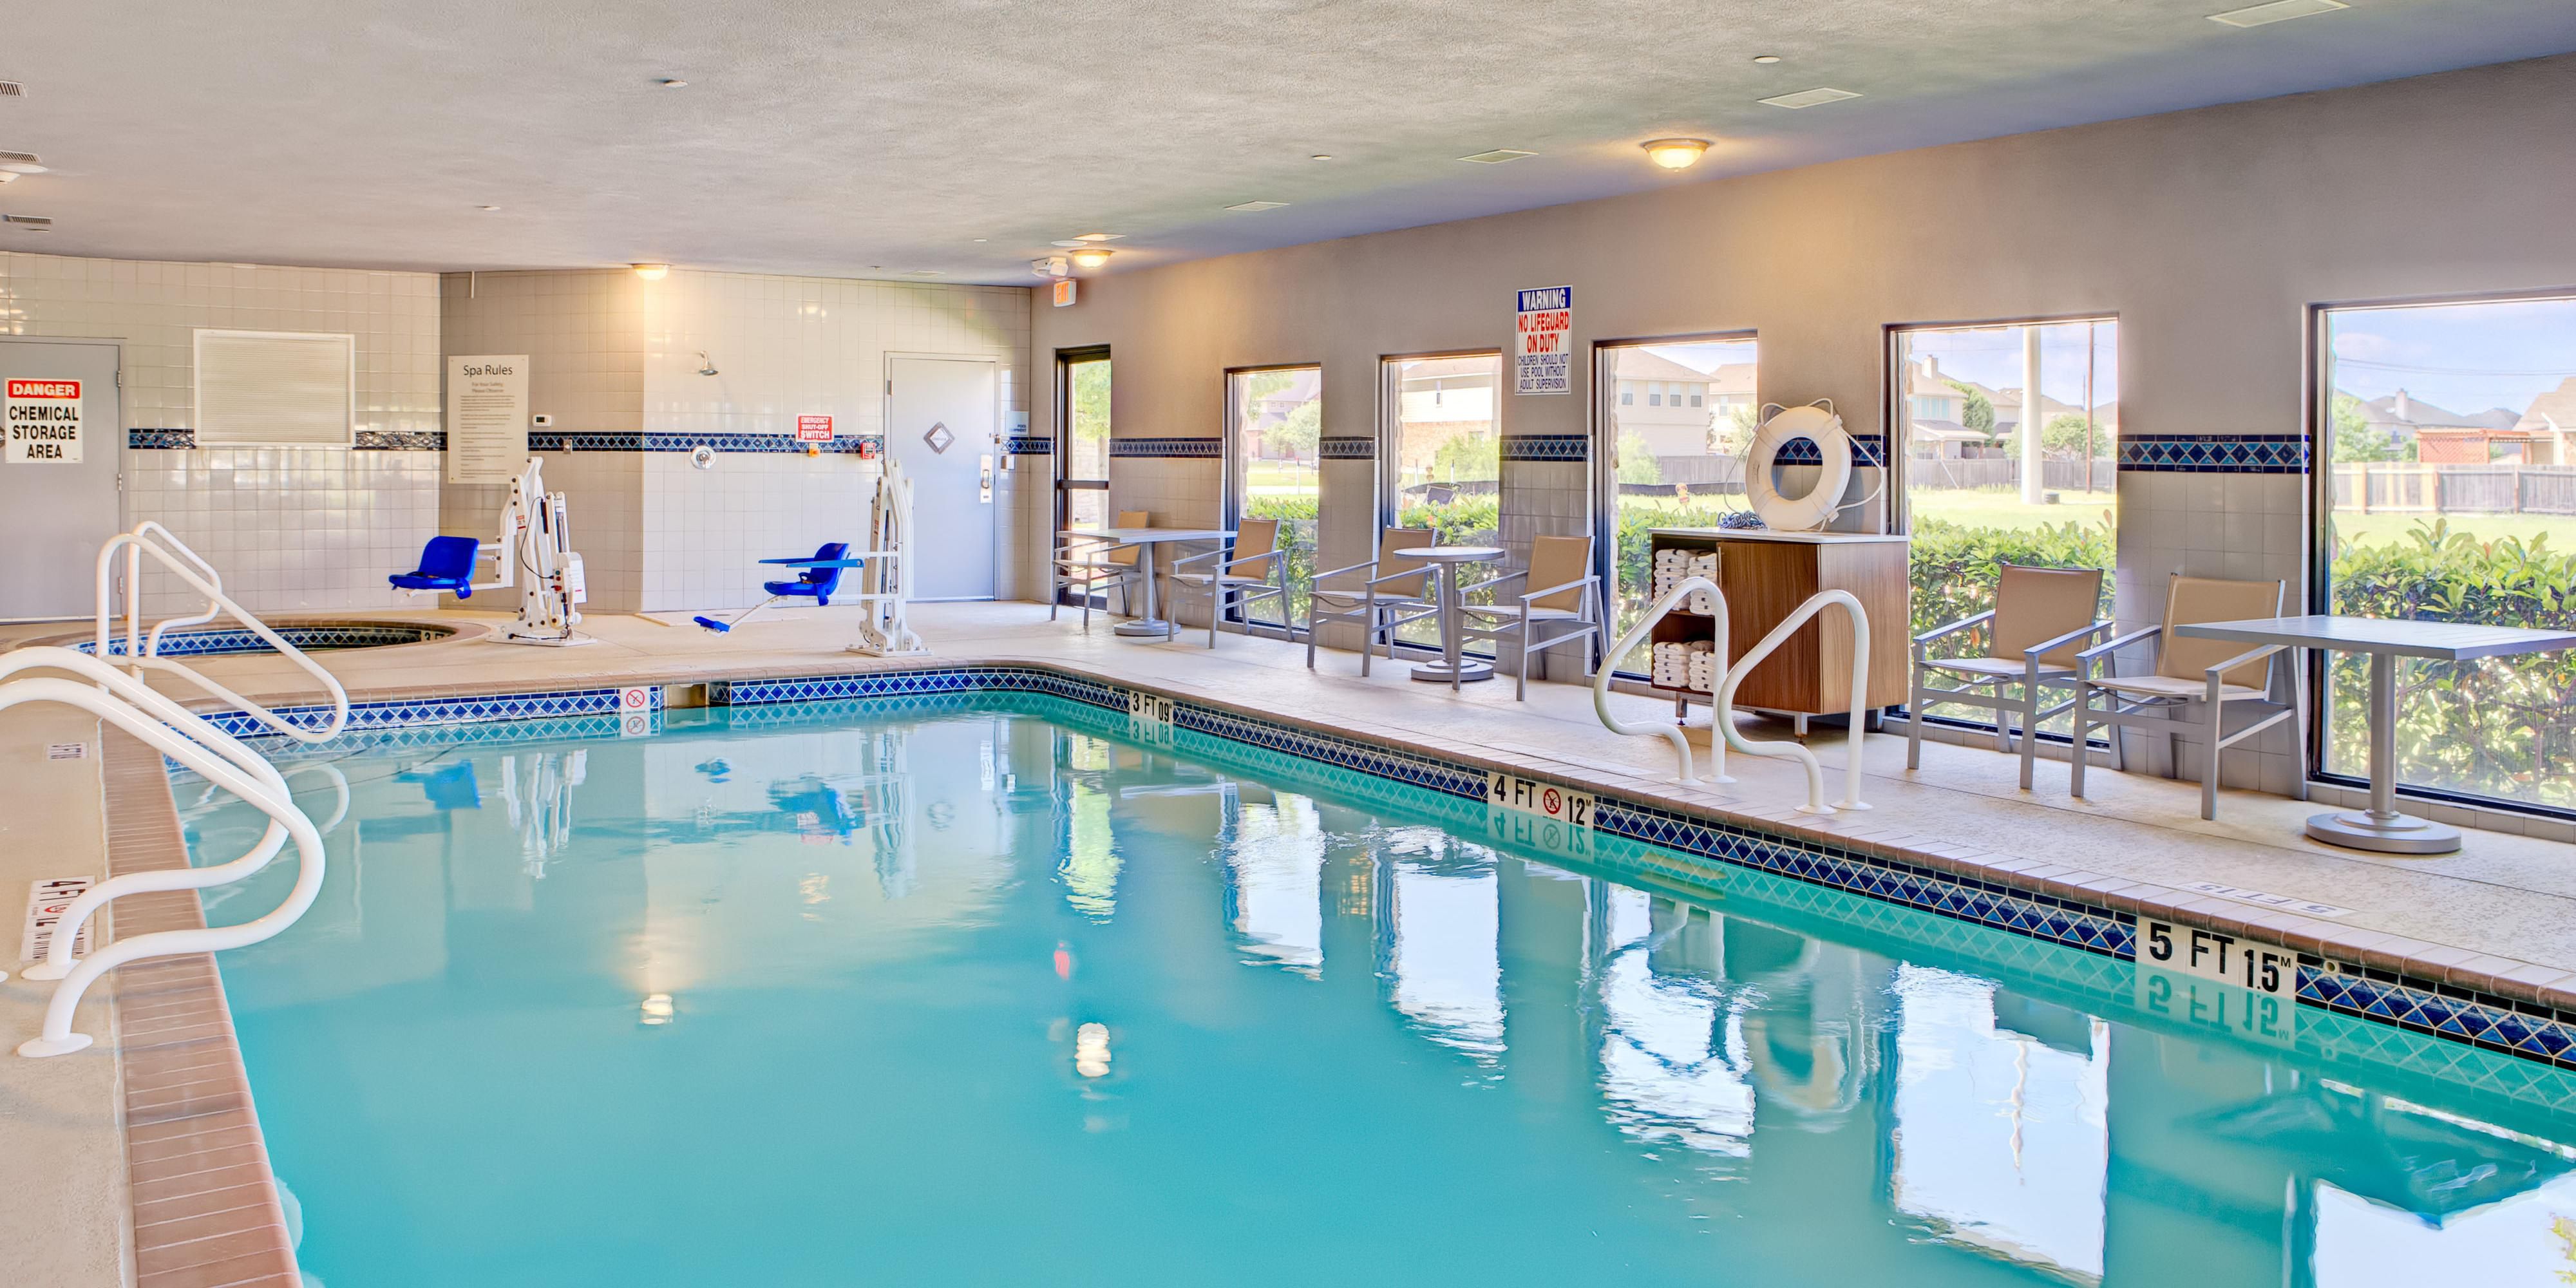 Stay with us and enjoy our heated indoor pool and whirlpool. Contact our Front Desk for special promotions available and make your reservation now.